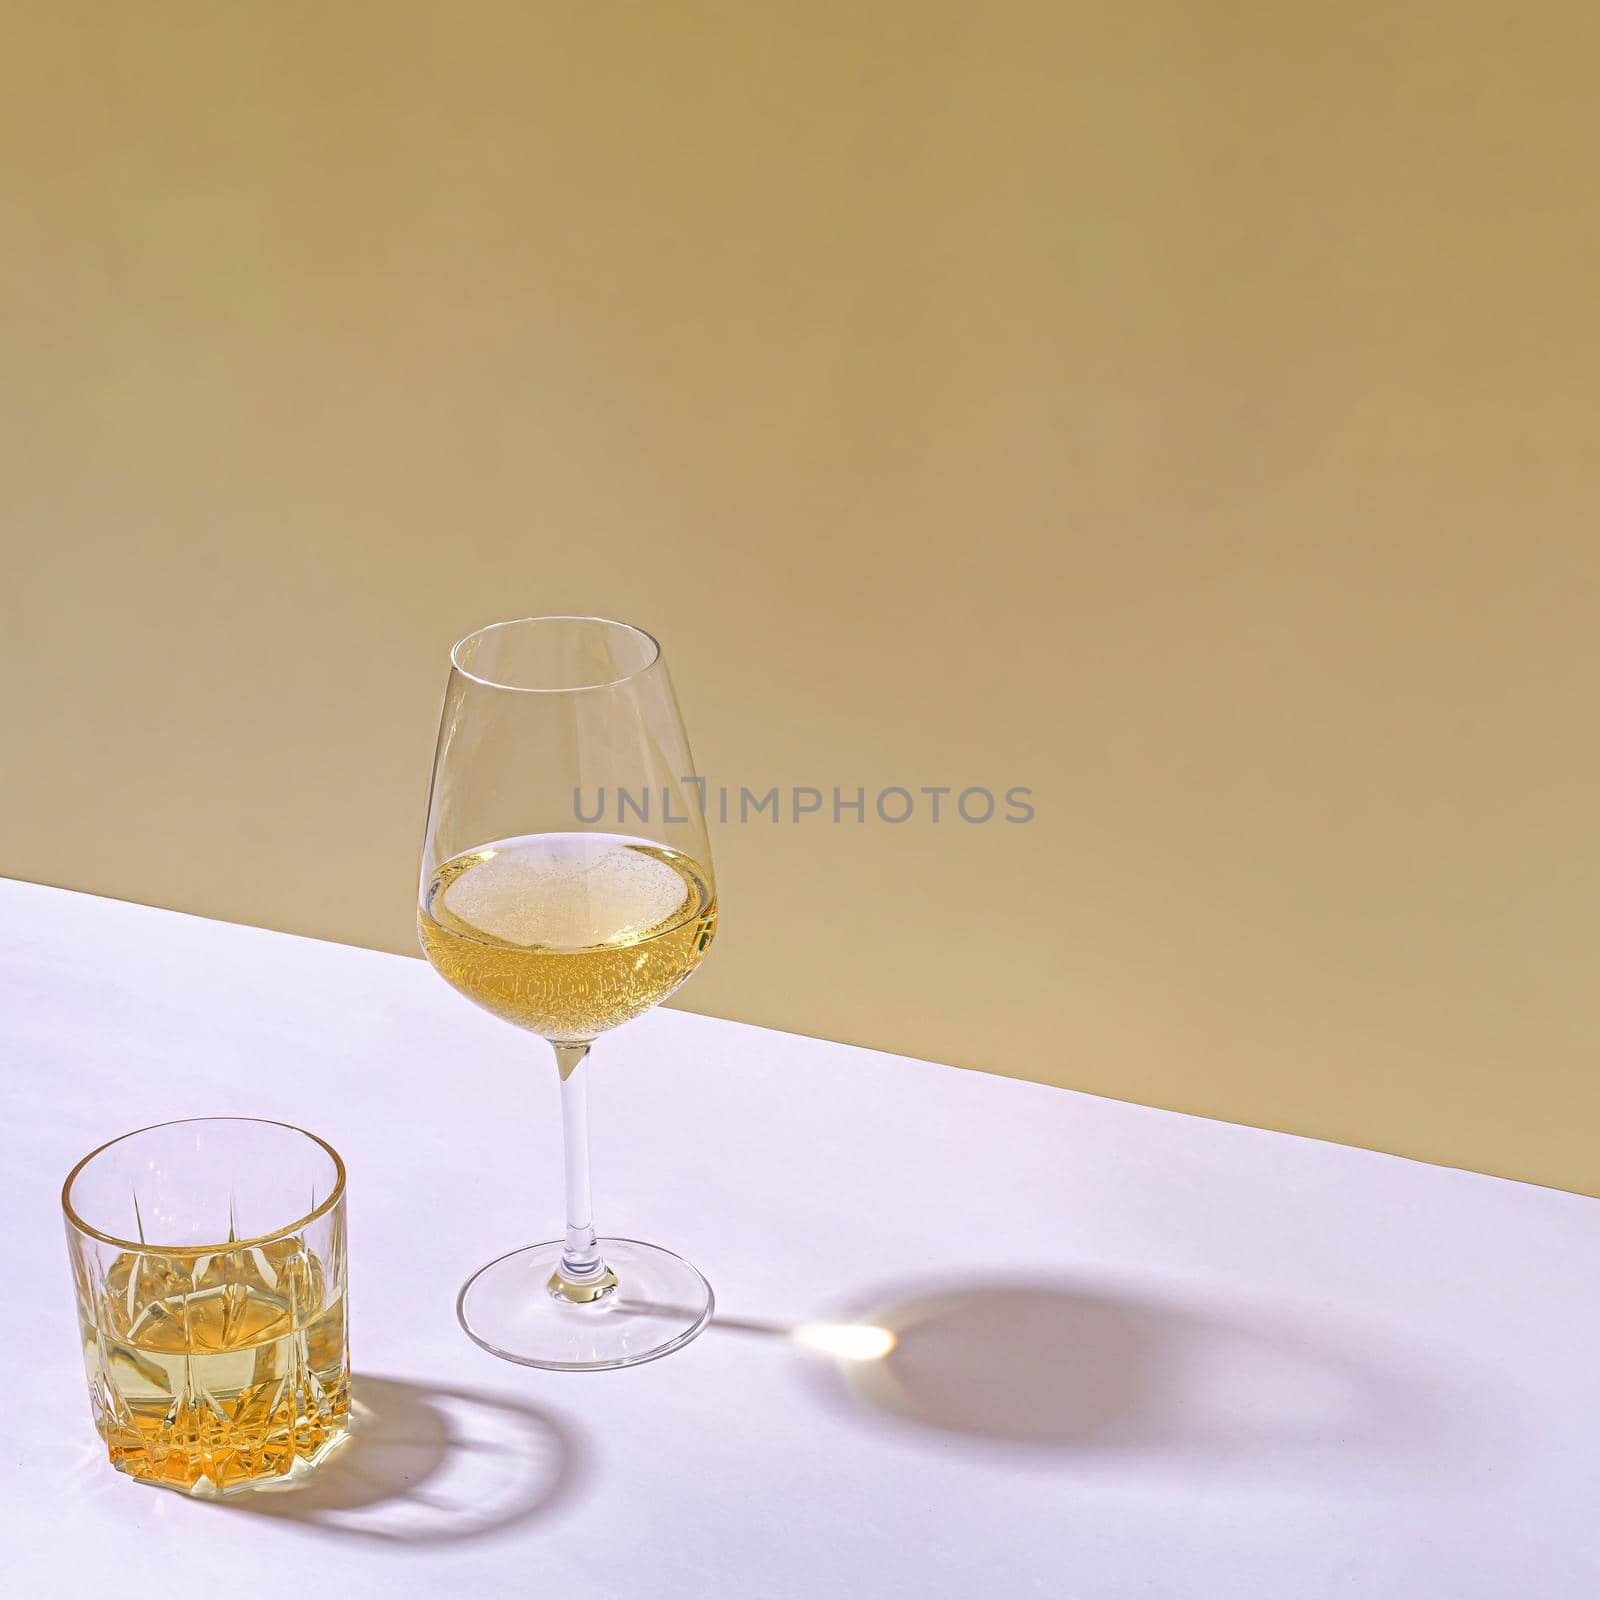 Tumbler of whiskey and glass of white wine side lit with shadow on a white table indoors with copy space